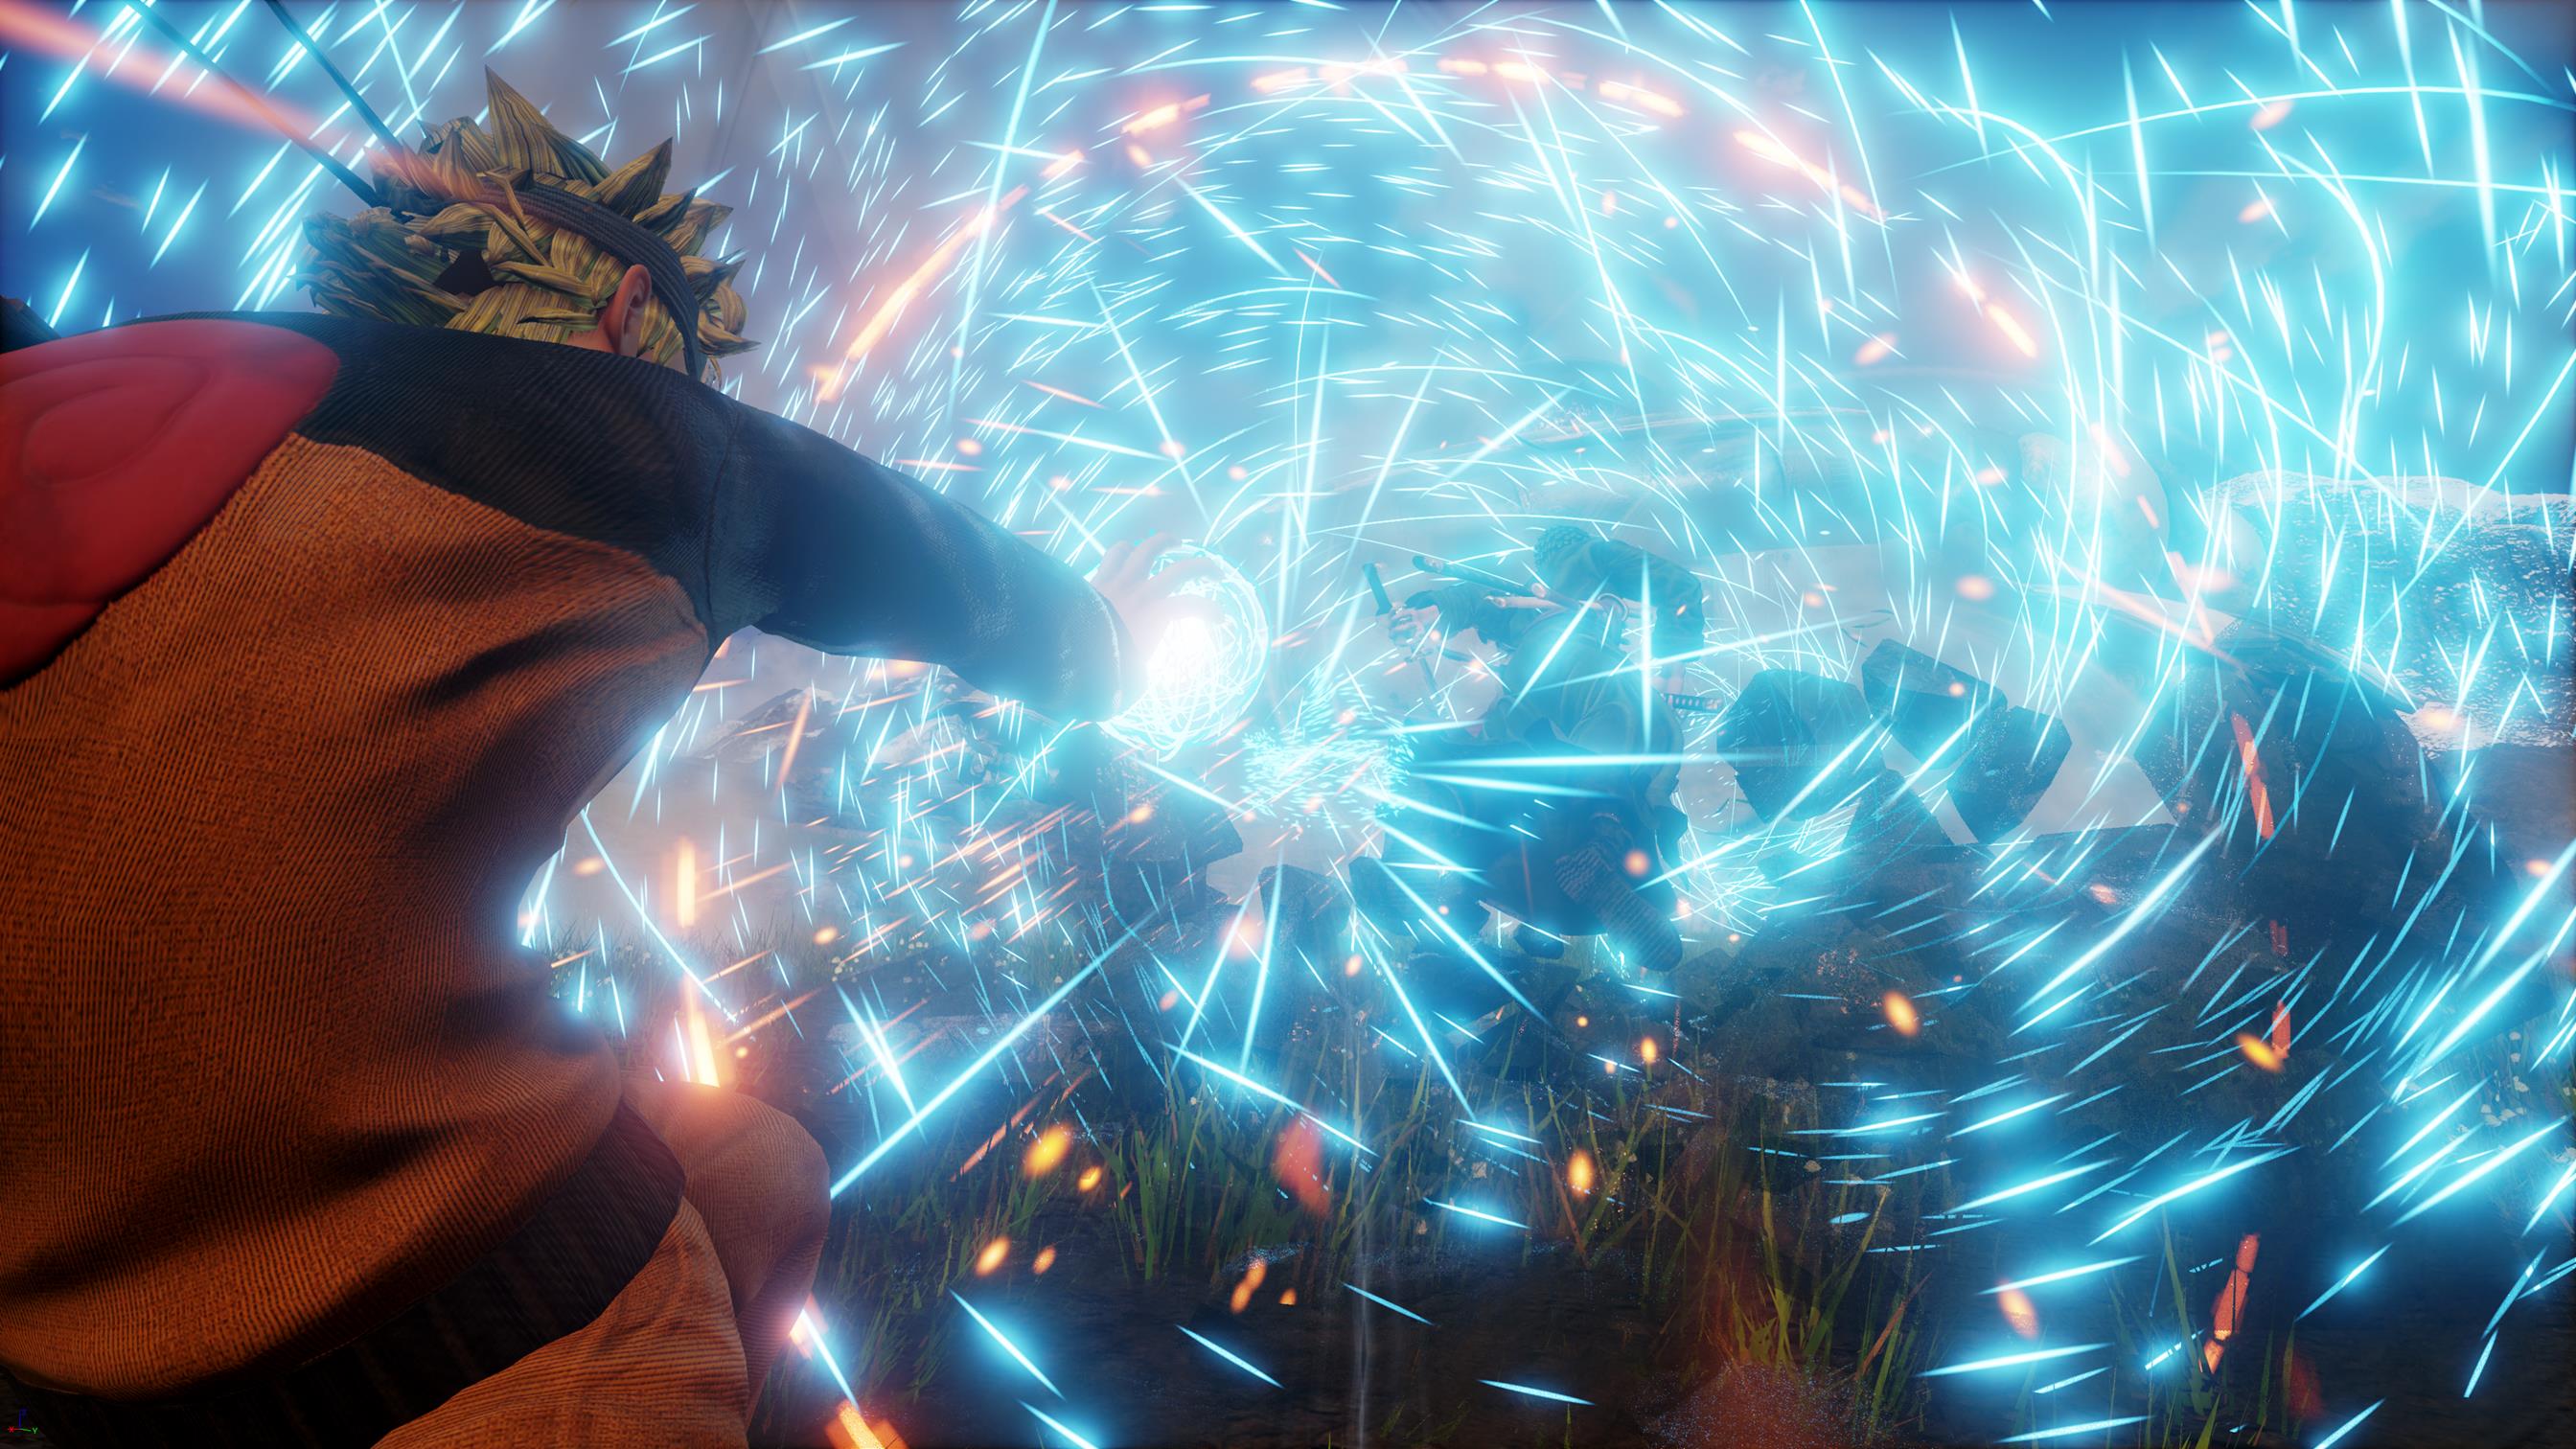 Image for E3 2018: Jump Force is an anime fighting game featuring Dragon Ball Z, One Piece, Naruto and more